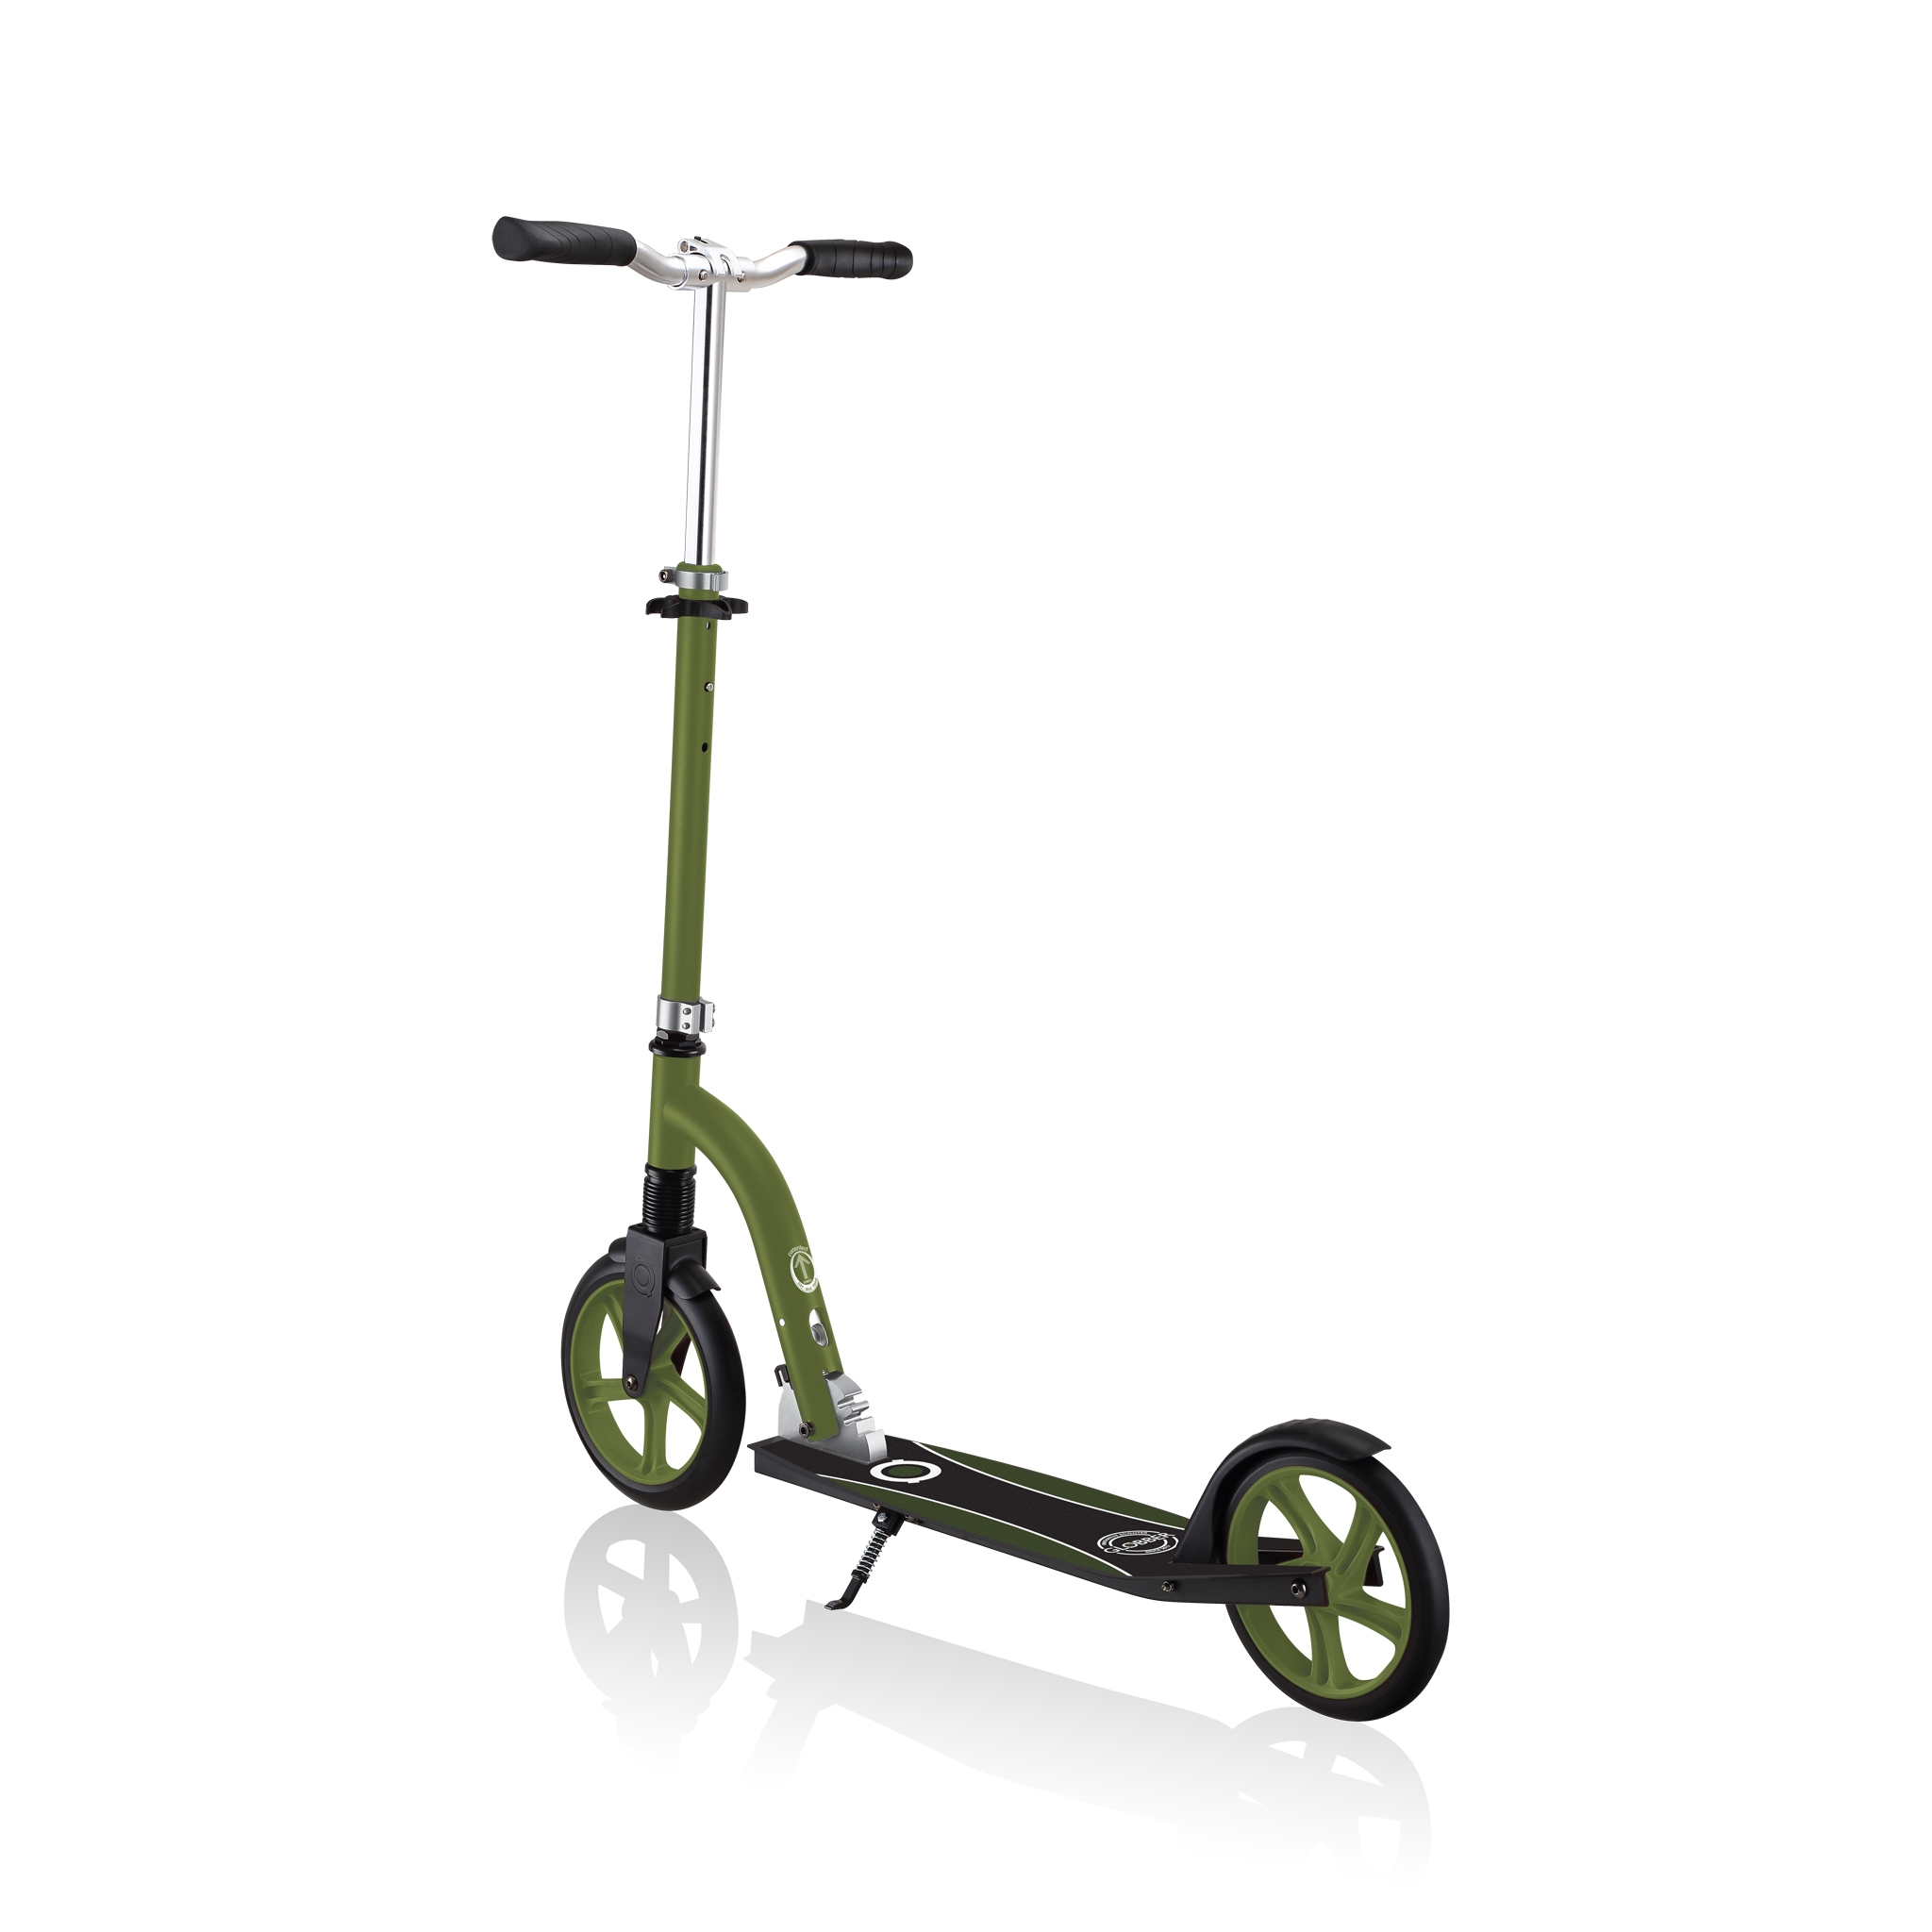 NL-230-205-DUO-big-wheel-scooter-with-front-suspension 8